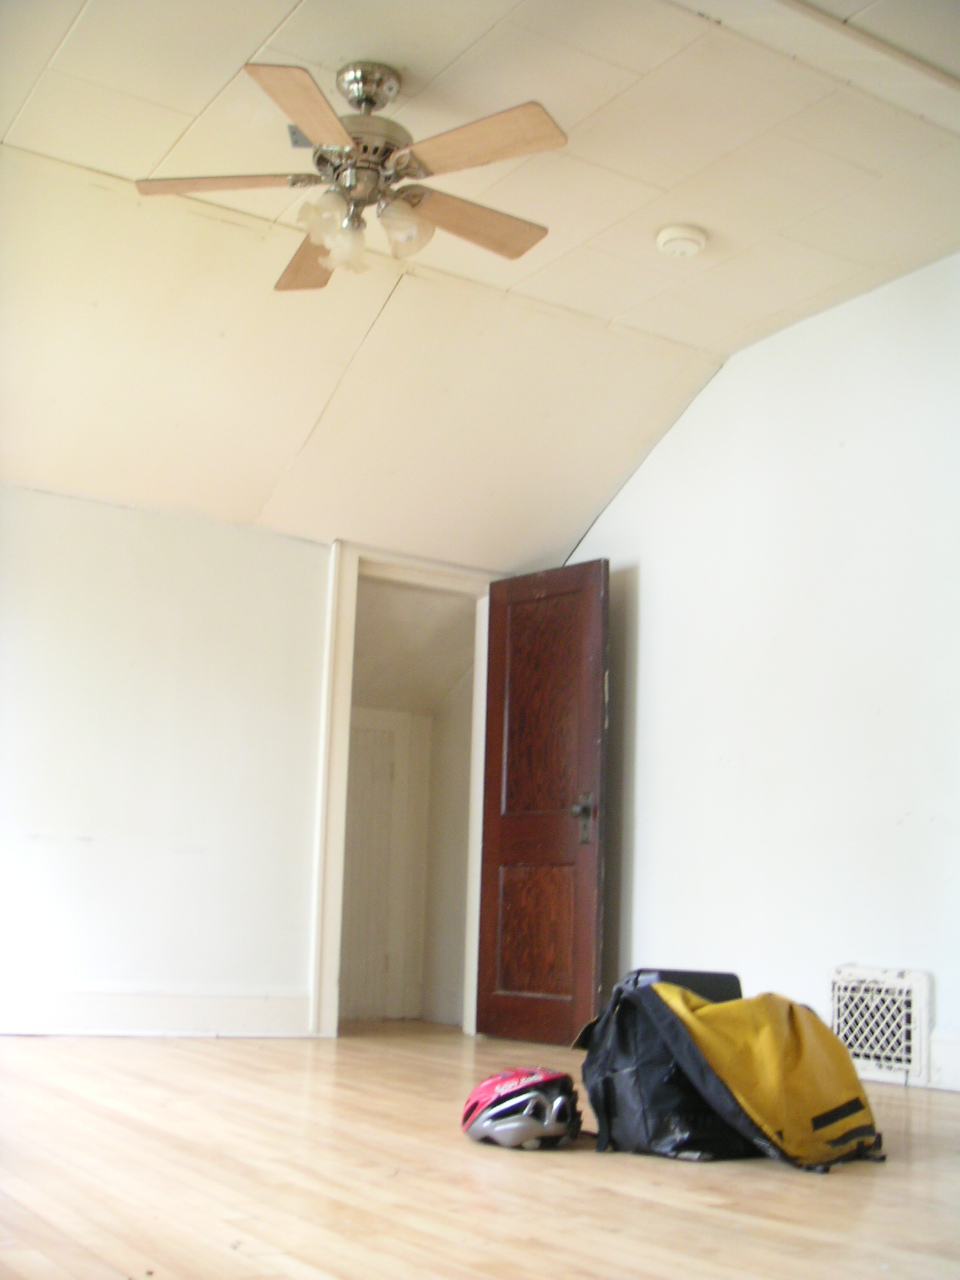 a suitcase is sitting on the floor near a ceiling fan